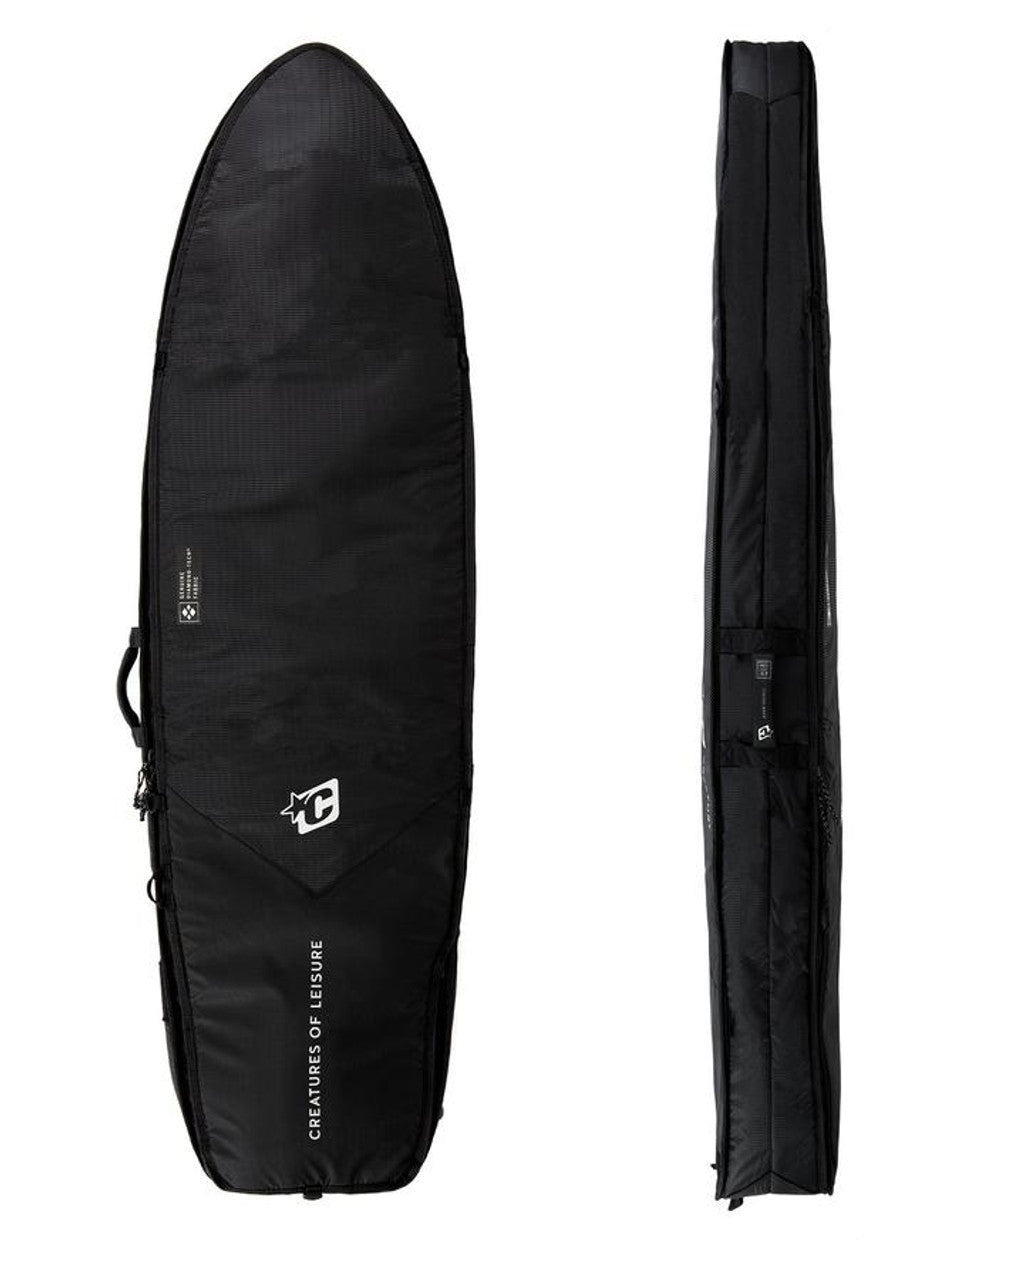 Creatures of Leisure Fish Double DT2.0 Surfboard Bag